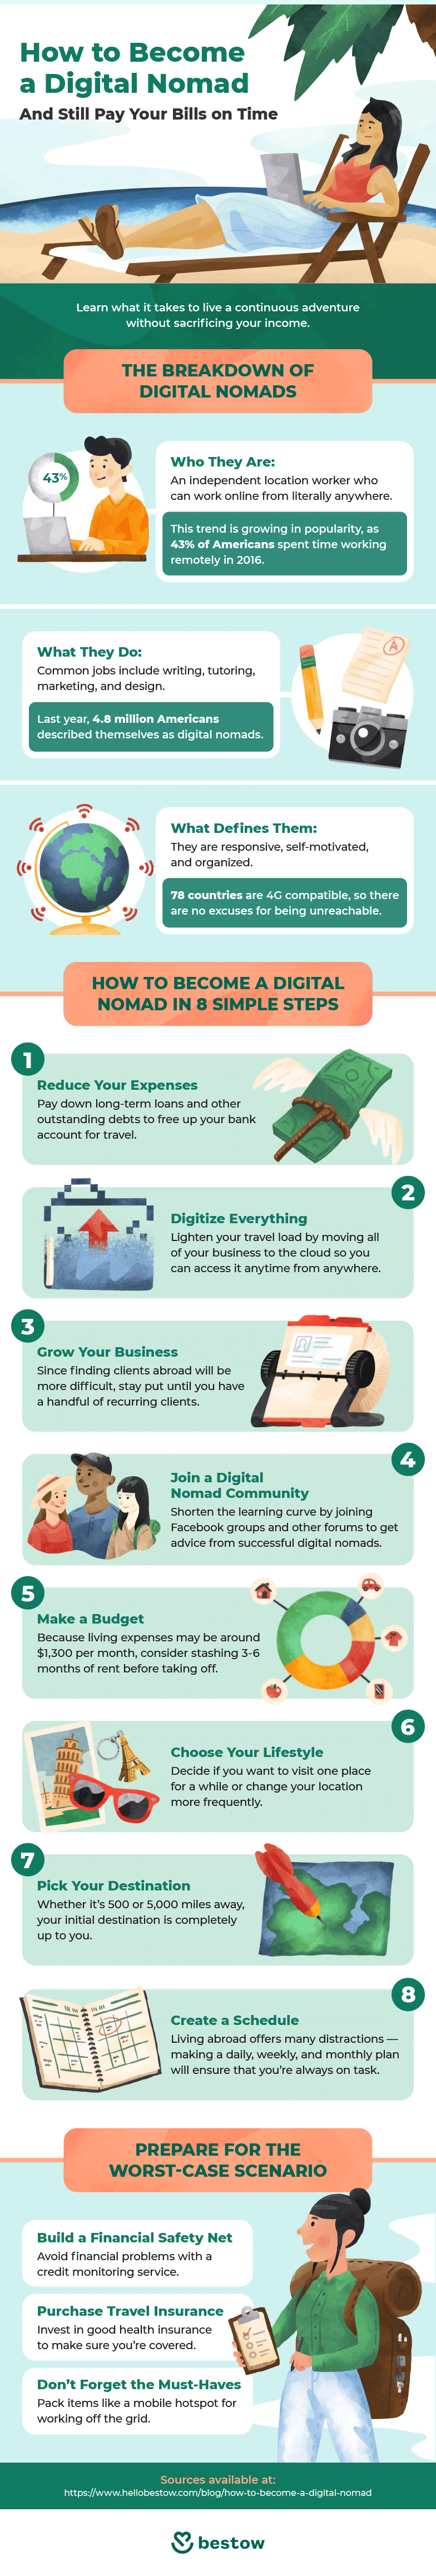 Infographic: How to become a digital nomad